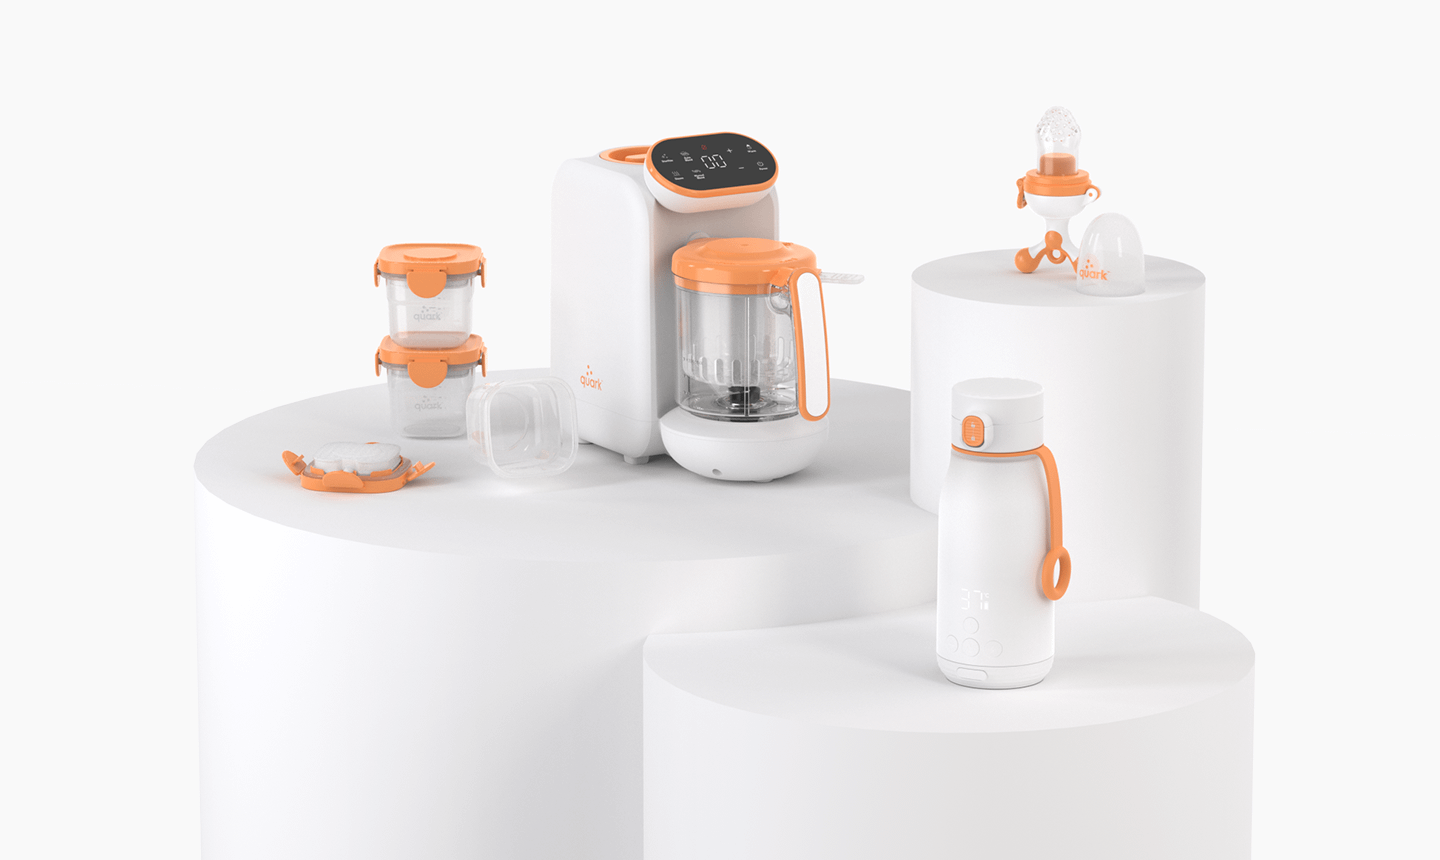 Quark Fresh Prep Bundle of baby products including a baby food processor, storage containers, freezer tray, and baby fruit feeder